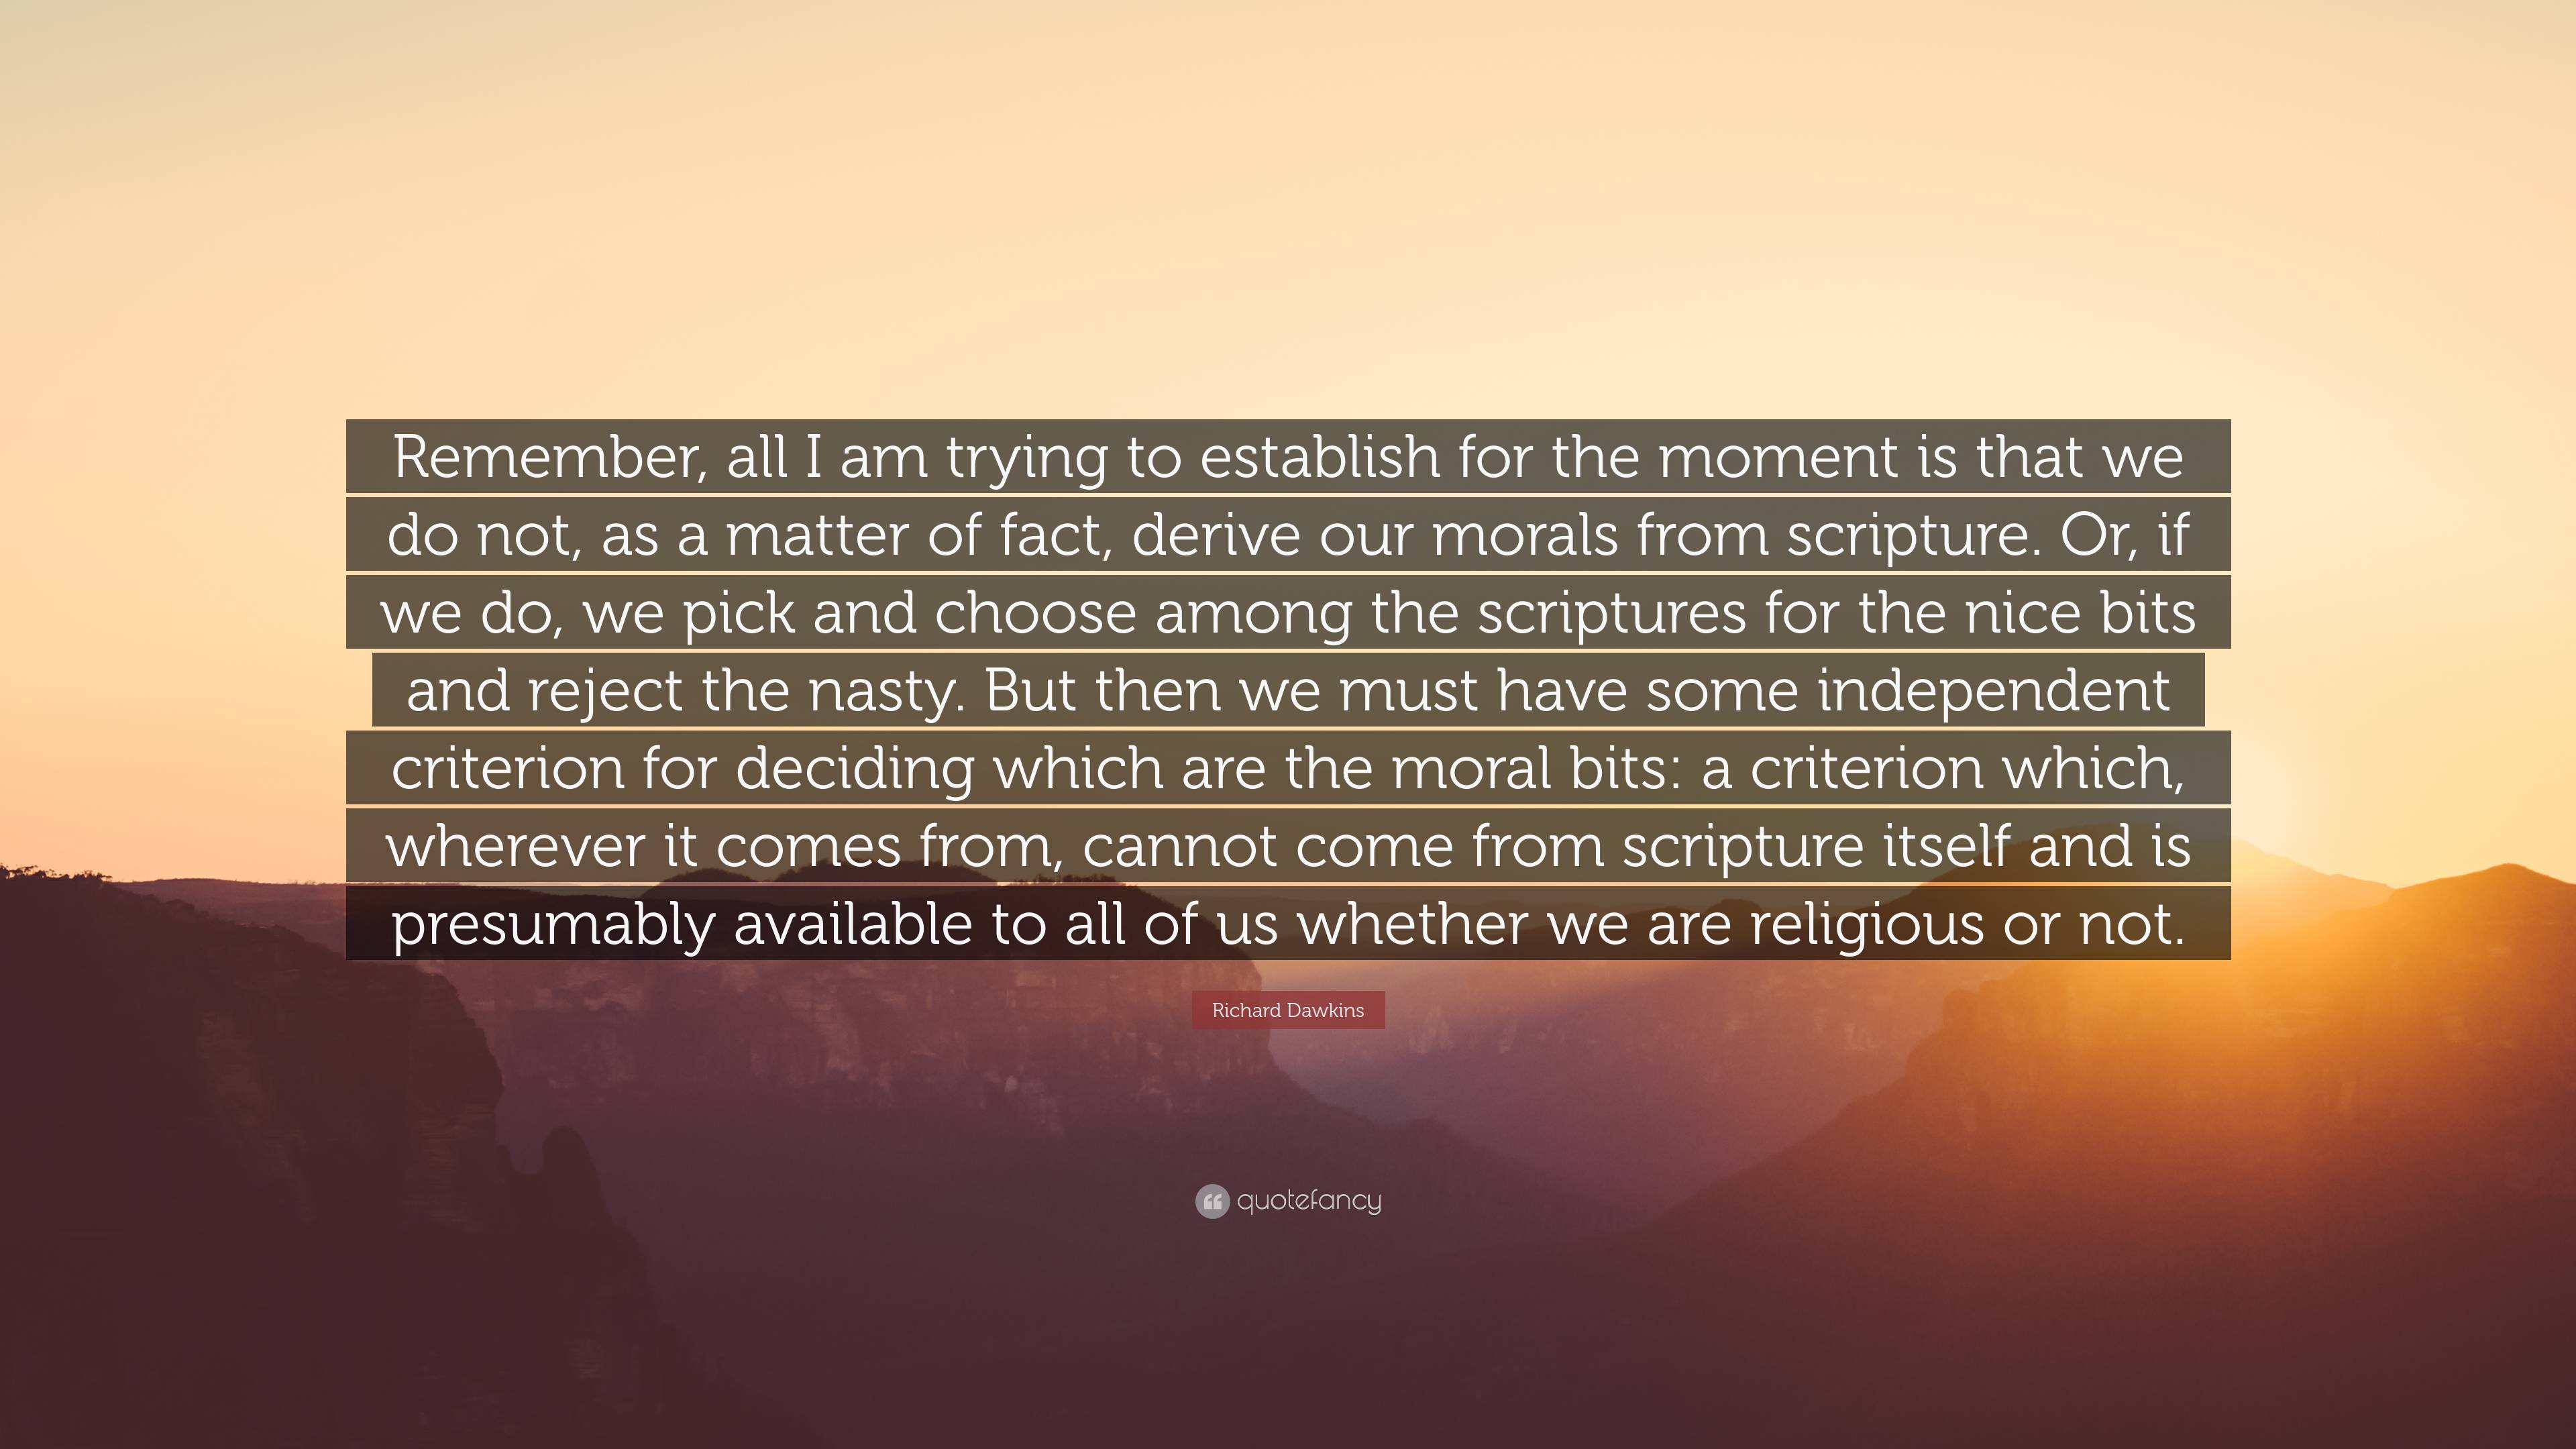 Richard Dawkins Quote: “Remember, all I am trying to establish for the ...